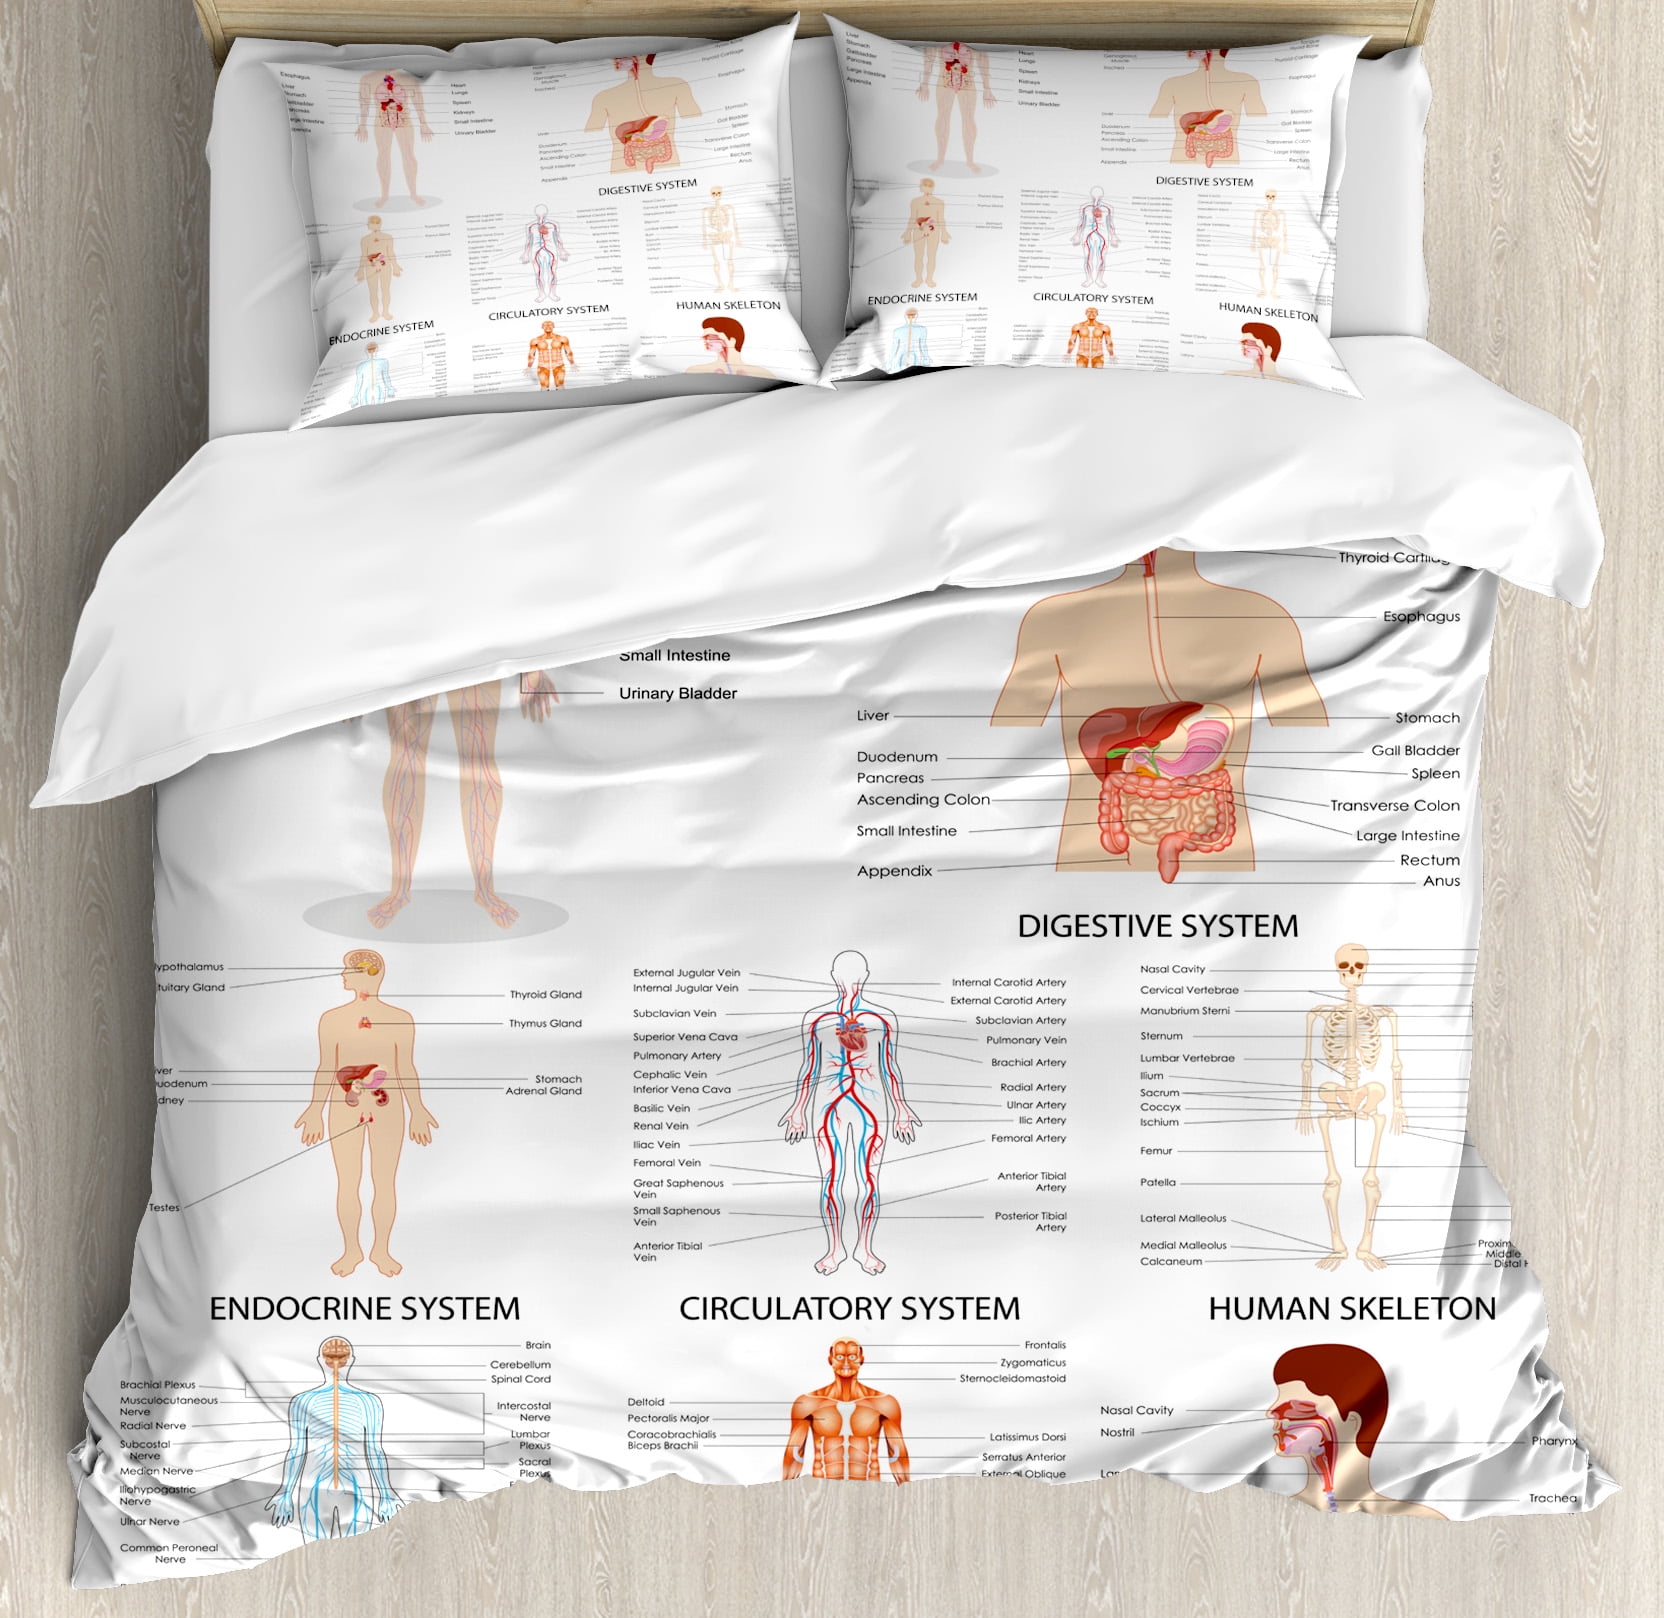 King Size Duvet Cover Size Chart